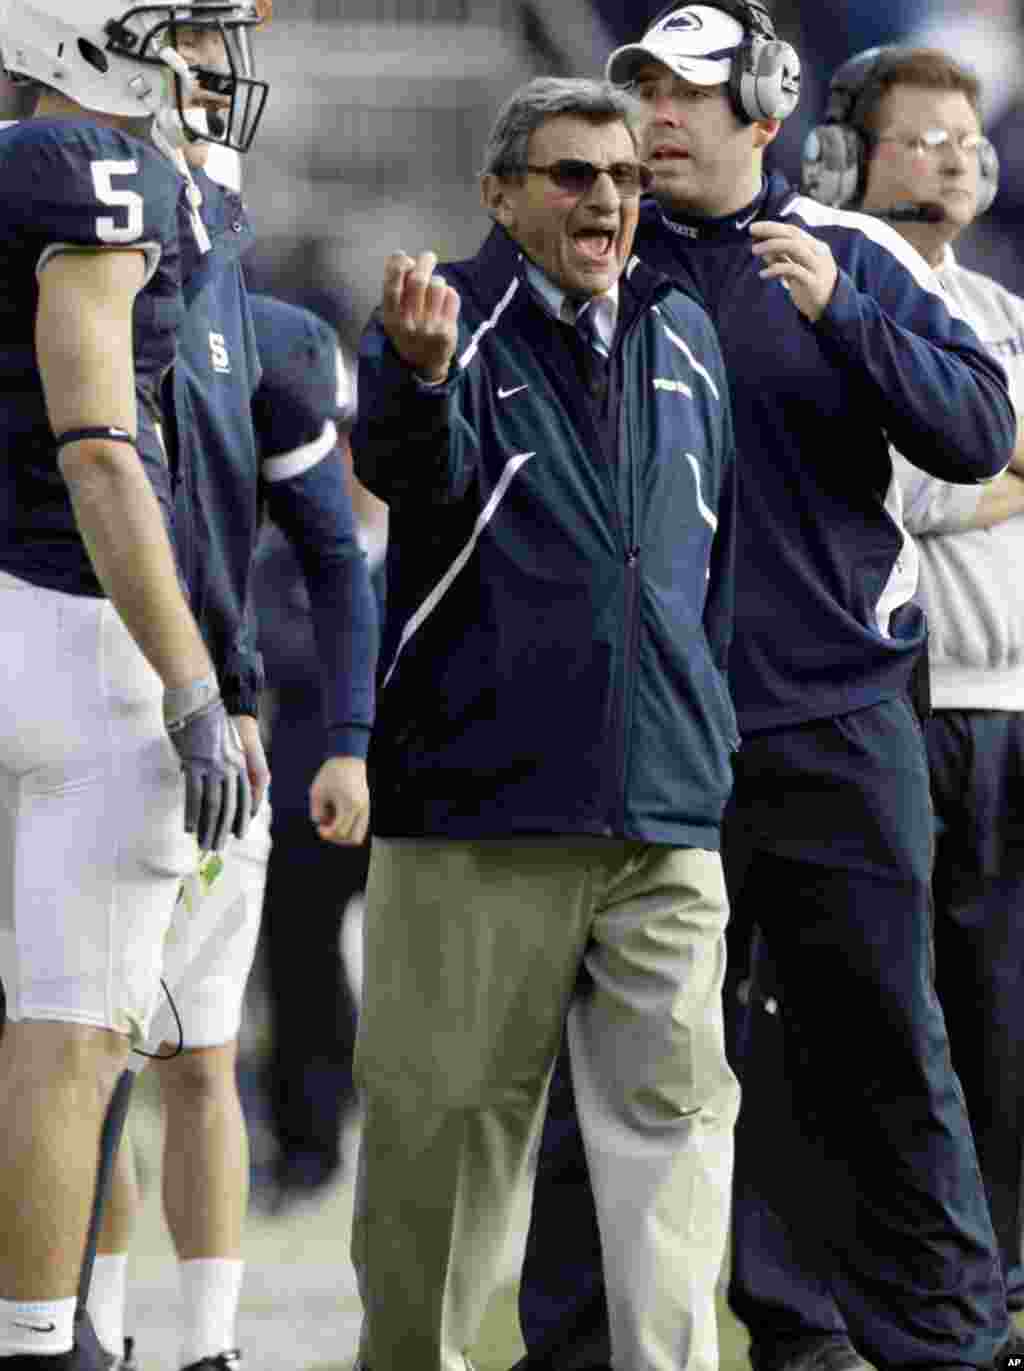 Penn State coach Joe Paterno Yells at officials from the sideline during the second half of an NCAA college football game against Indiana in State College, Pa. Penn State won 31-20, November 14, 2009. (AP)